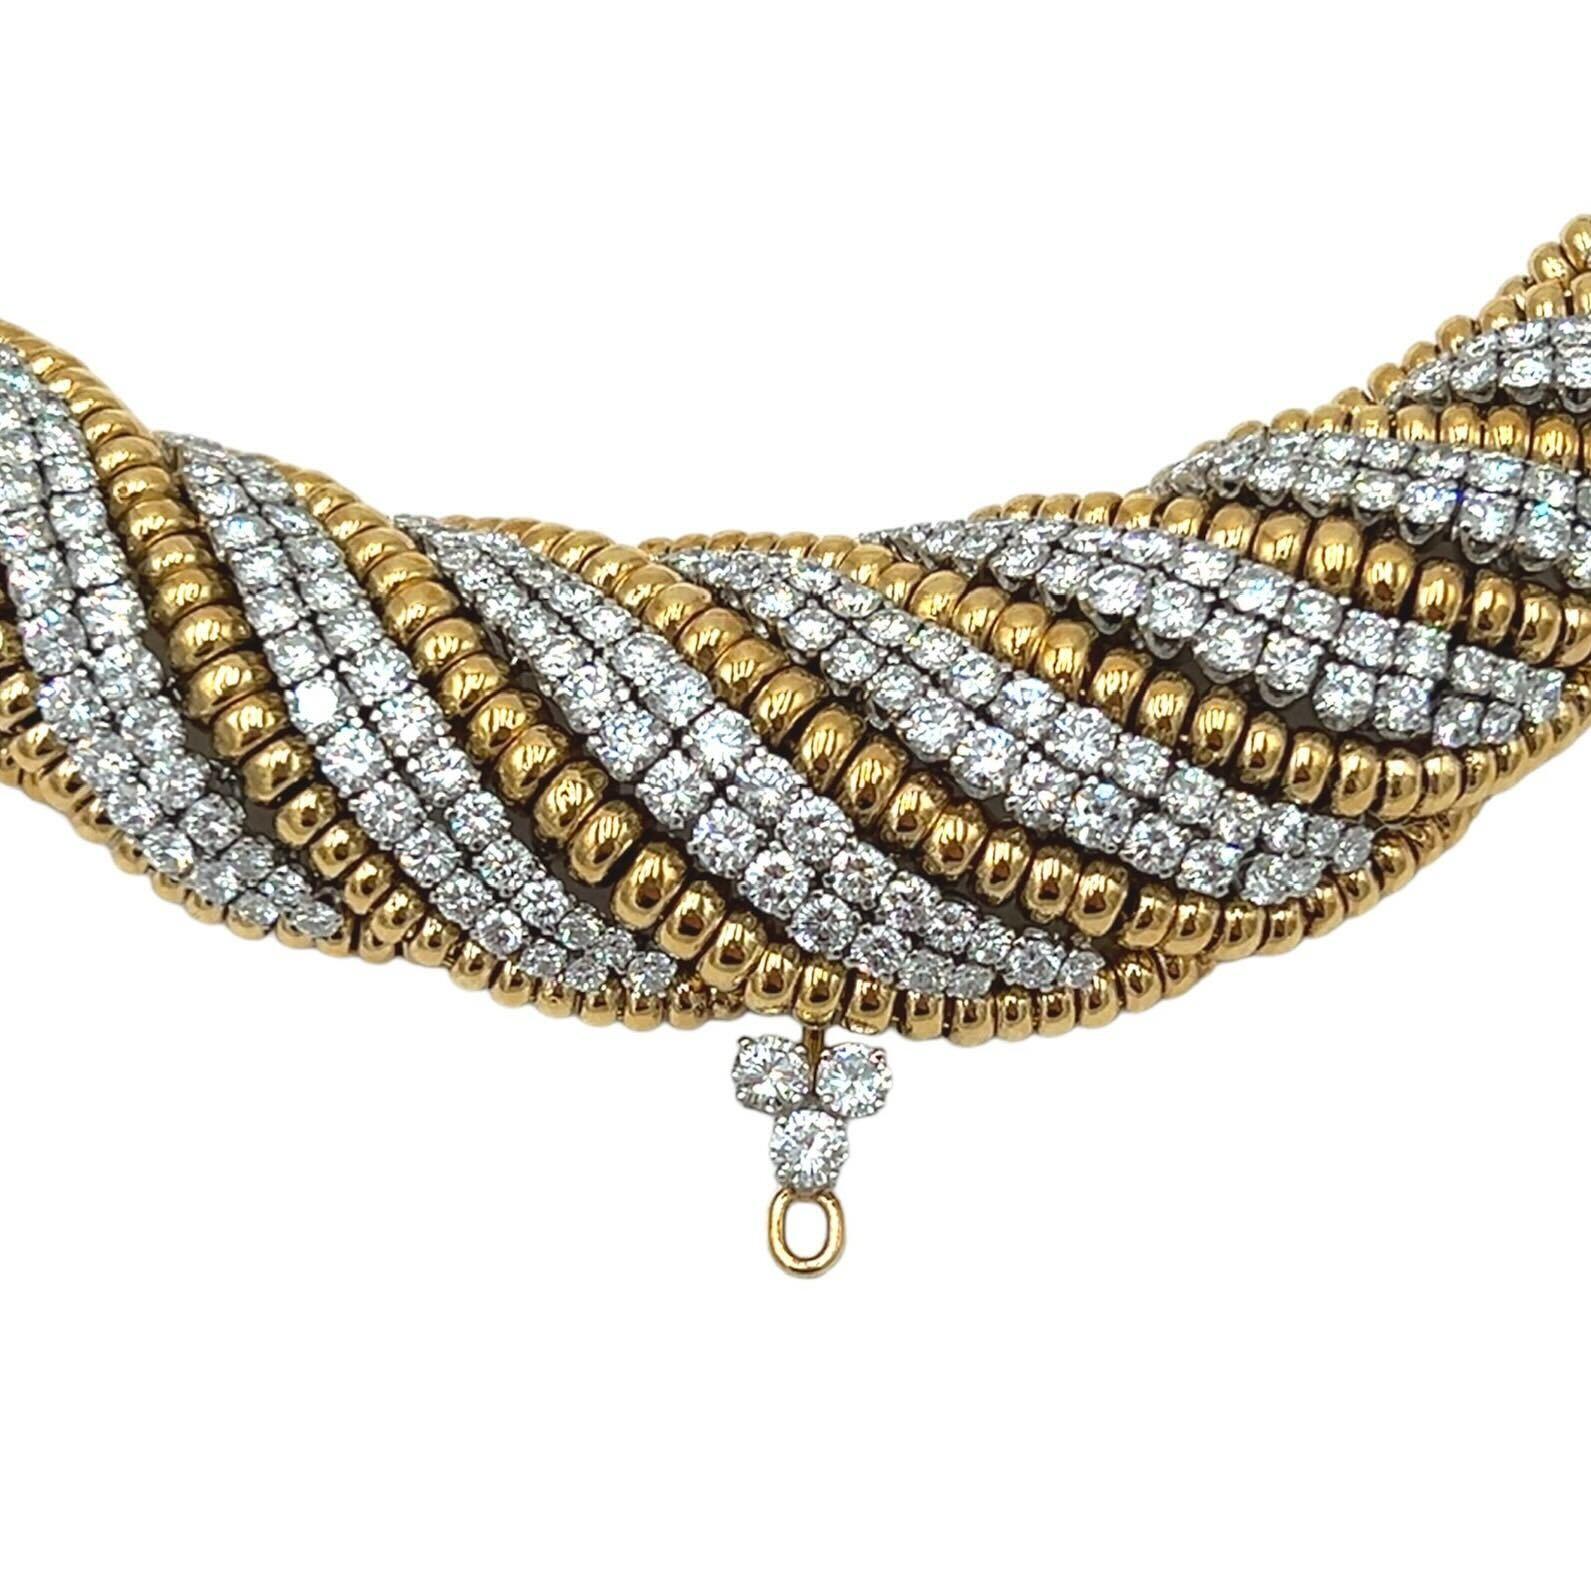  An 18 karat yellow gold, platinum and diamond necklace, David Webb.  Designed in a tapering trompe l’oeil twist style in gold, with every other strand of the twist enhanced with multiple platinum set round brilliant cut diamonds, totaling